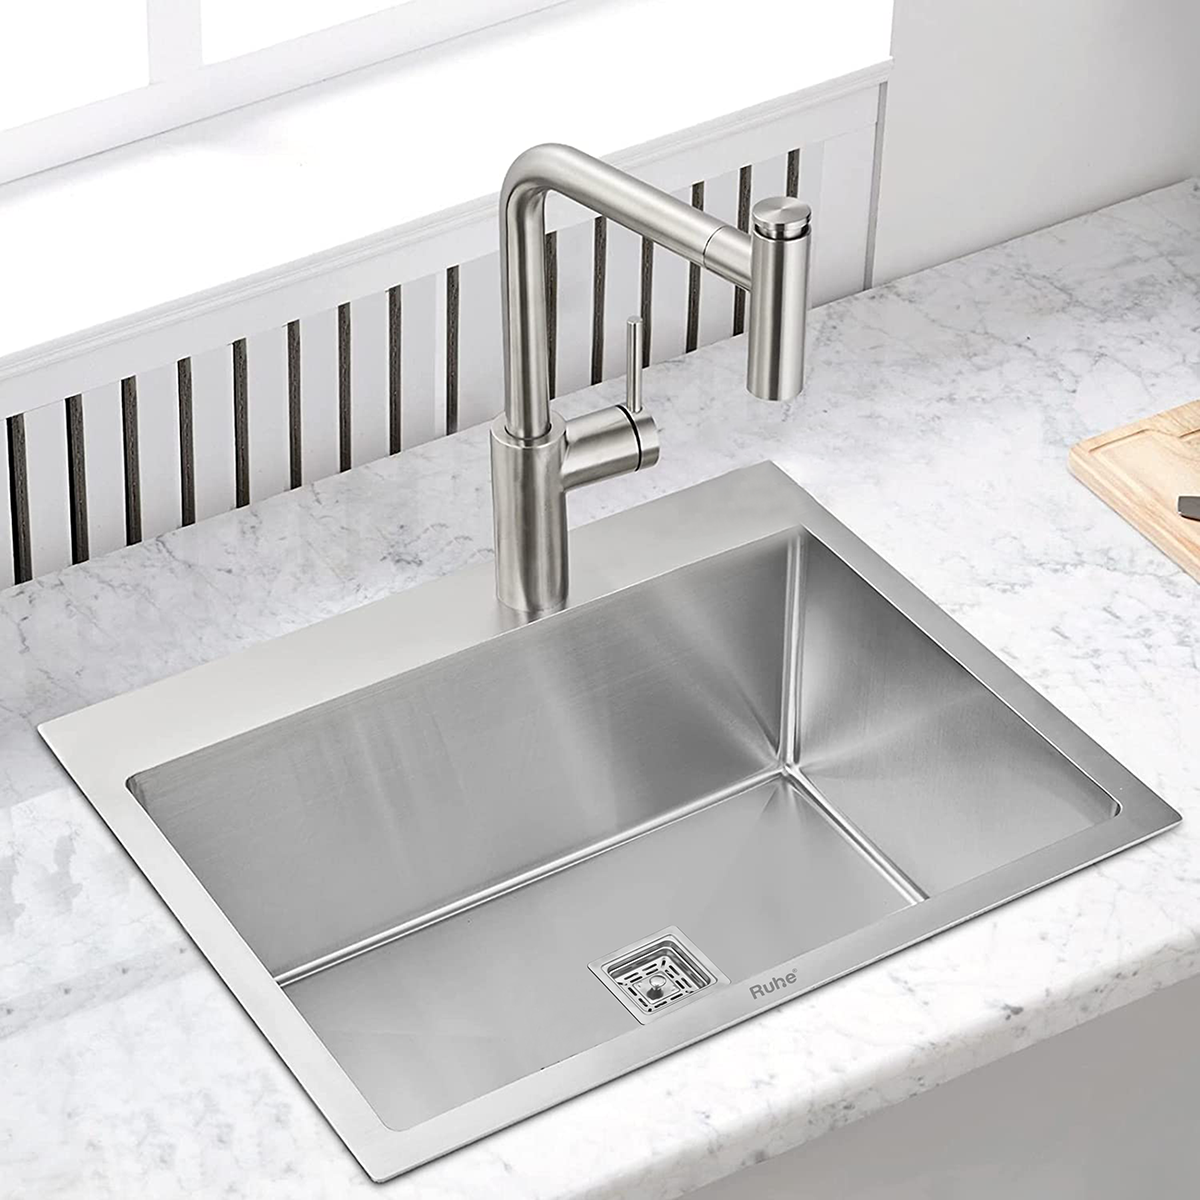 Handmade Single Bowl 304-Grade Kitchen Sink (22 x 18 x 10 Inches) with Tap Hole installed